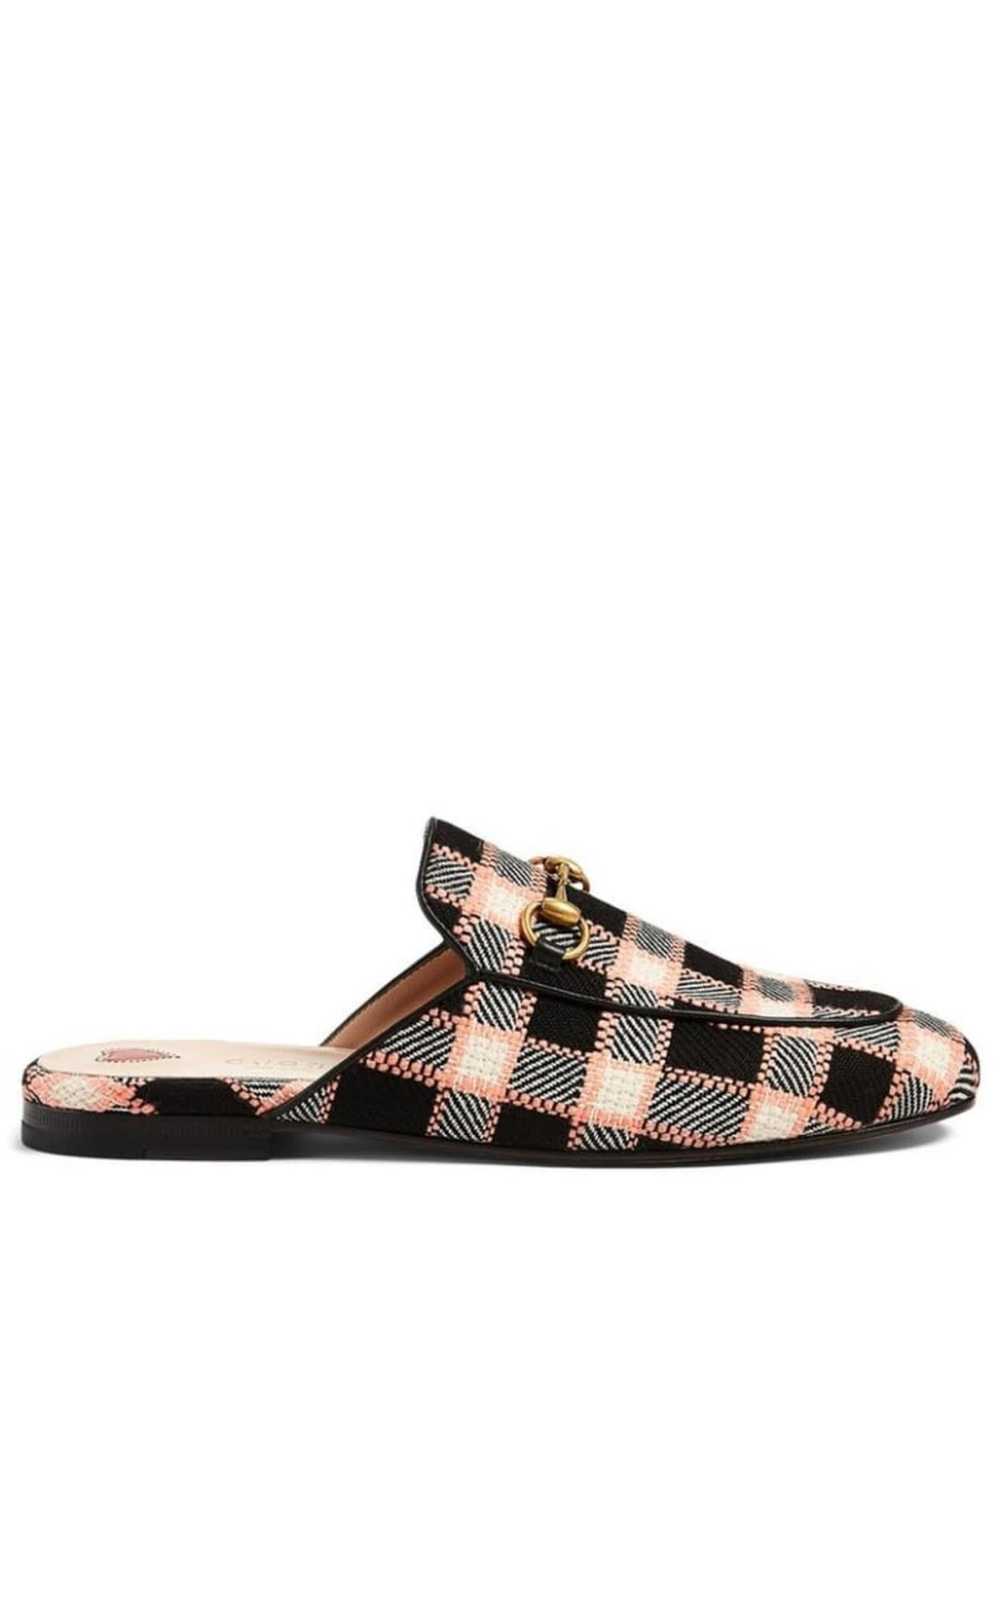 GUCCI Princetown Tweed Check Woven Mules - image 1